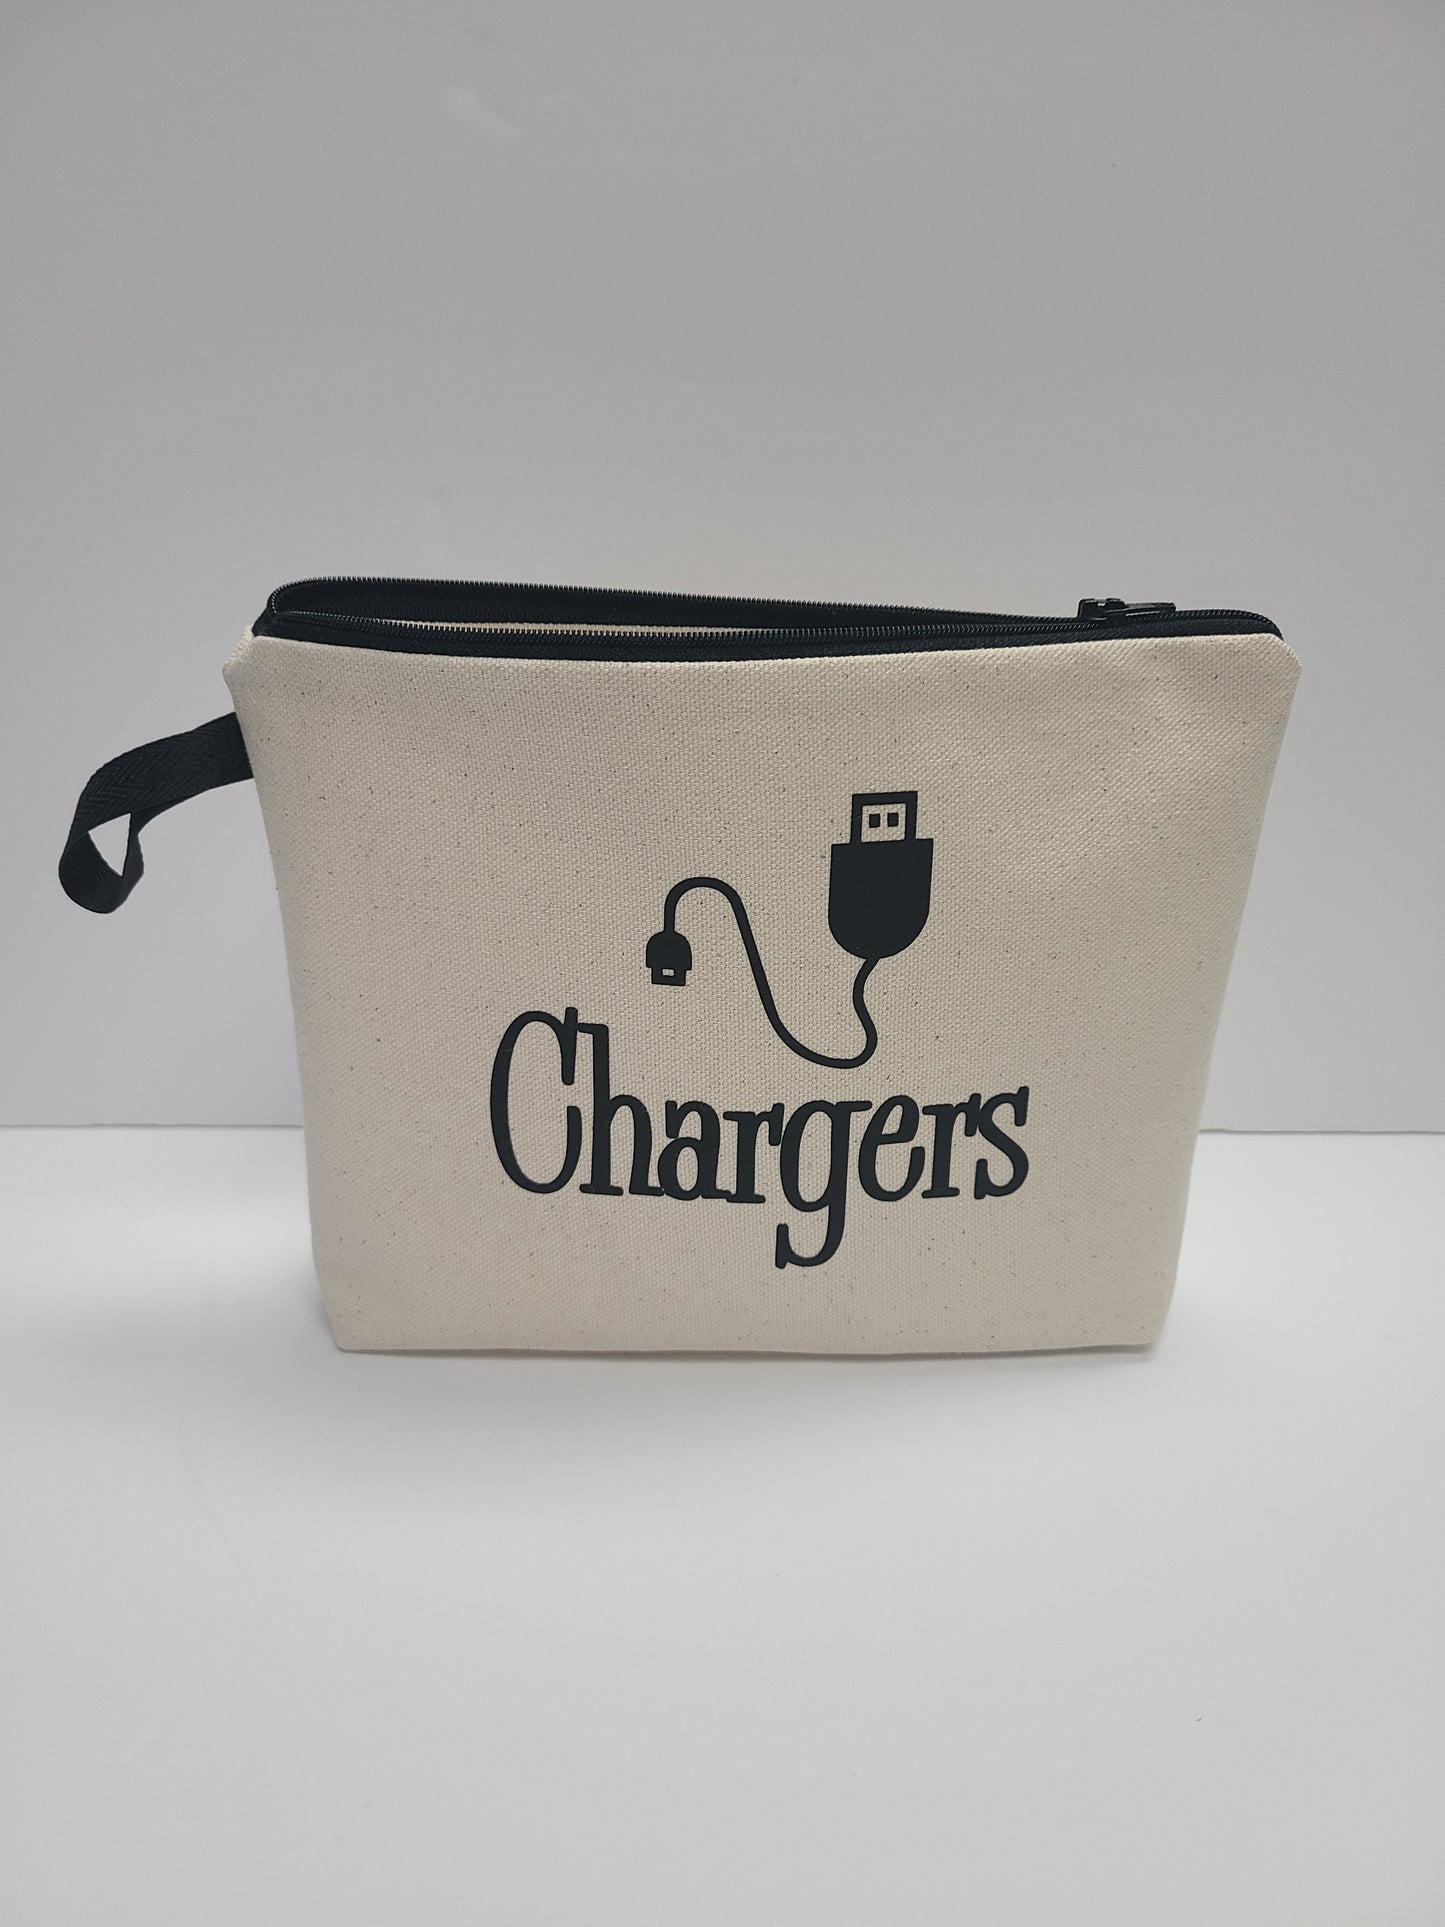 Chargers small Toiletry Bag